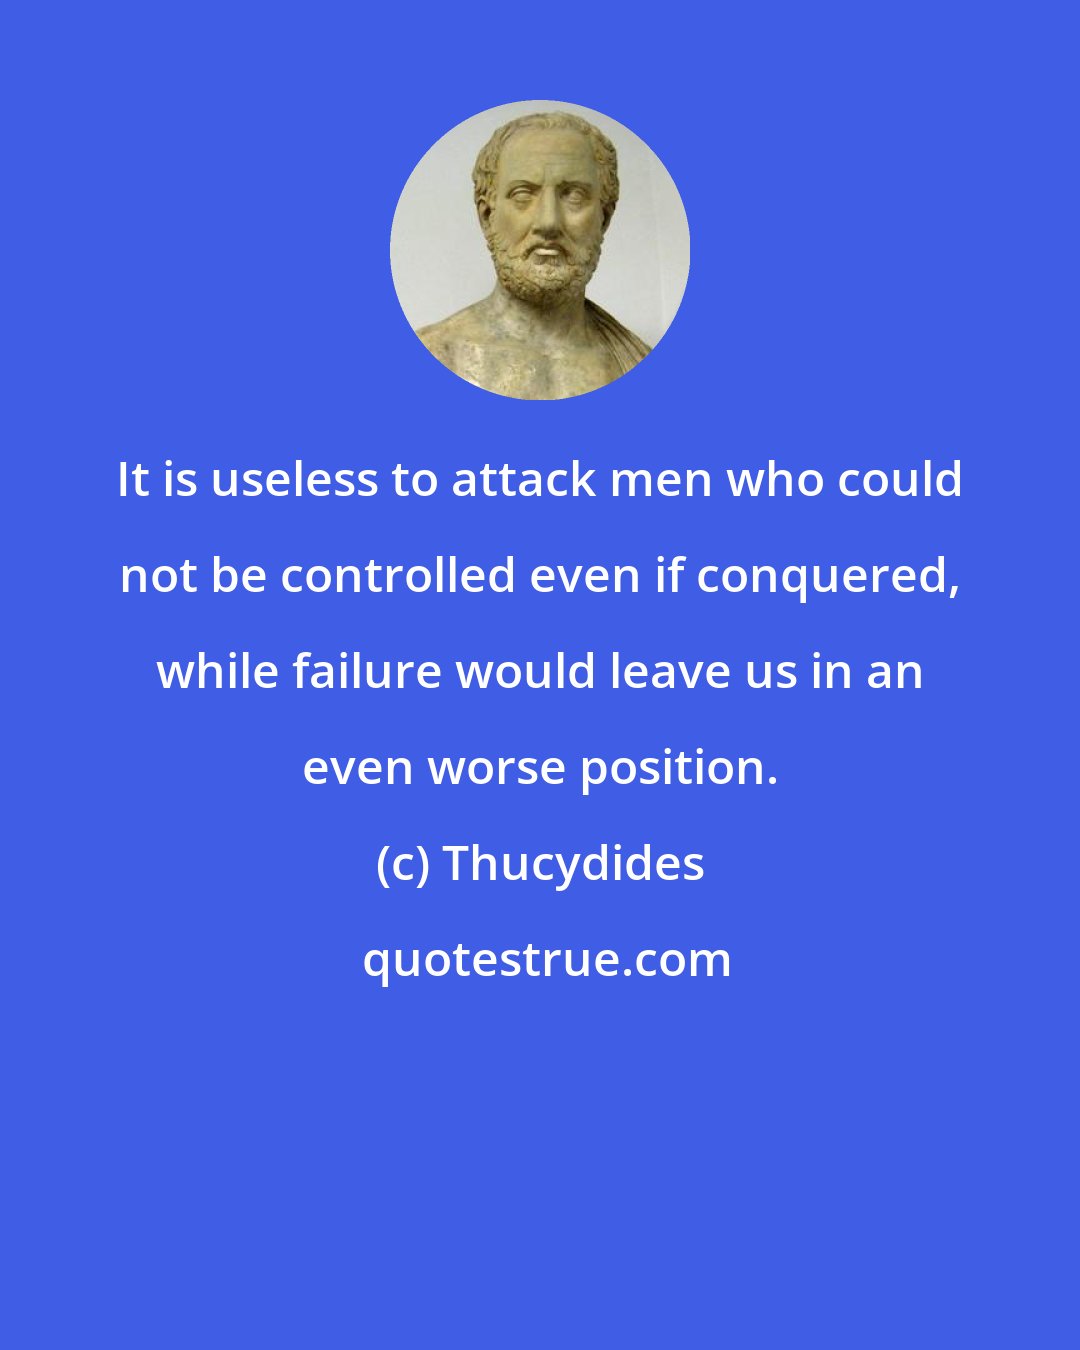 Thucydides: It is useless to attack men who could not be controlled even if conquered, while failure would leave us in an even worse position.